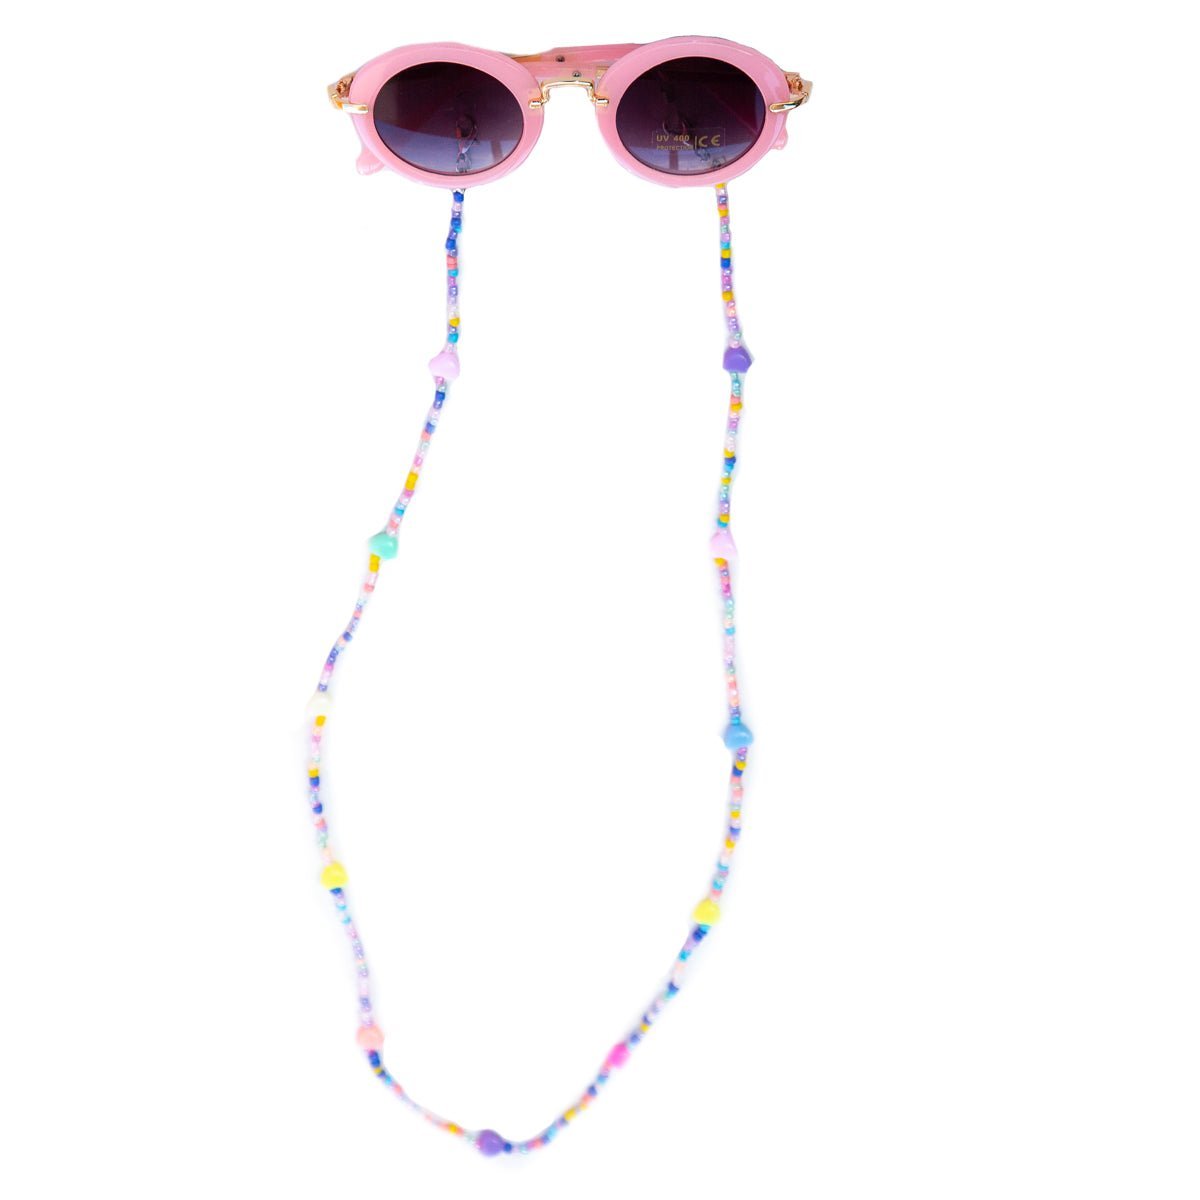 ROUND SUNGLASSES WITH PASTEL HEARTS CHAIN